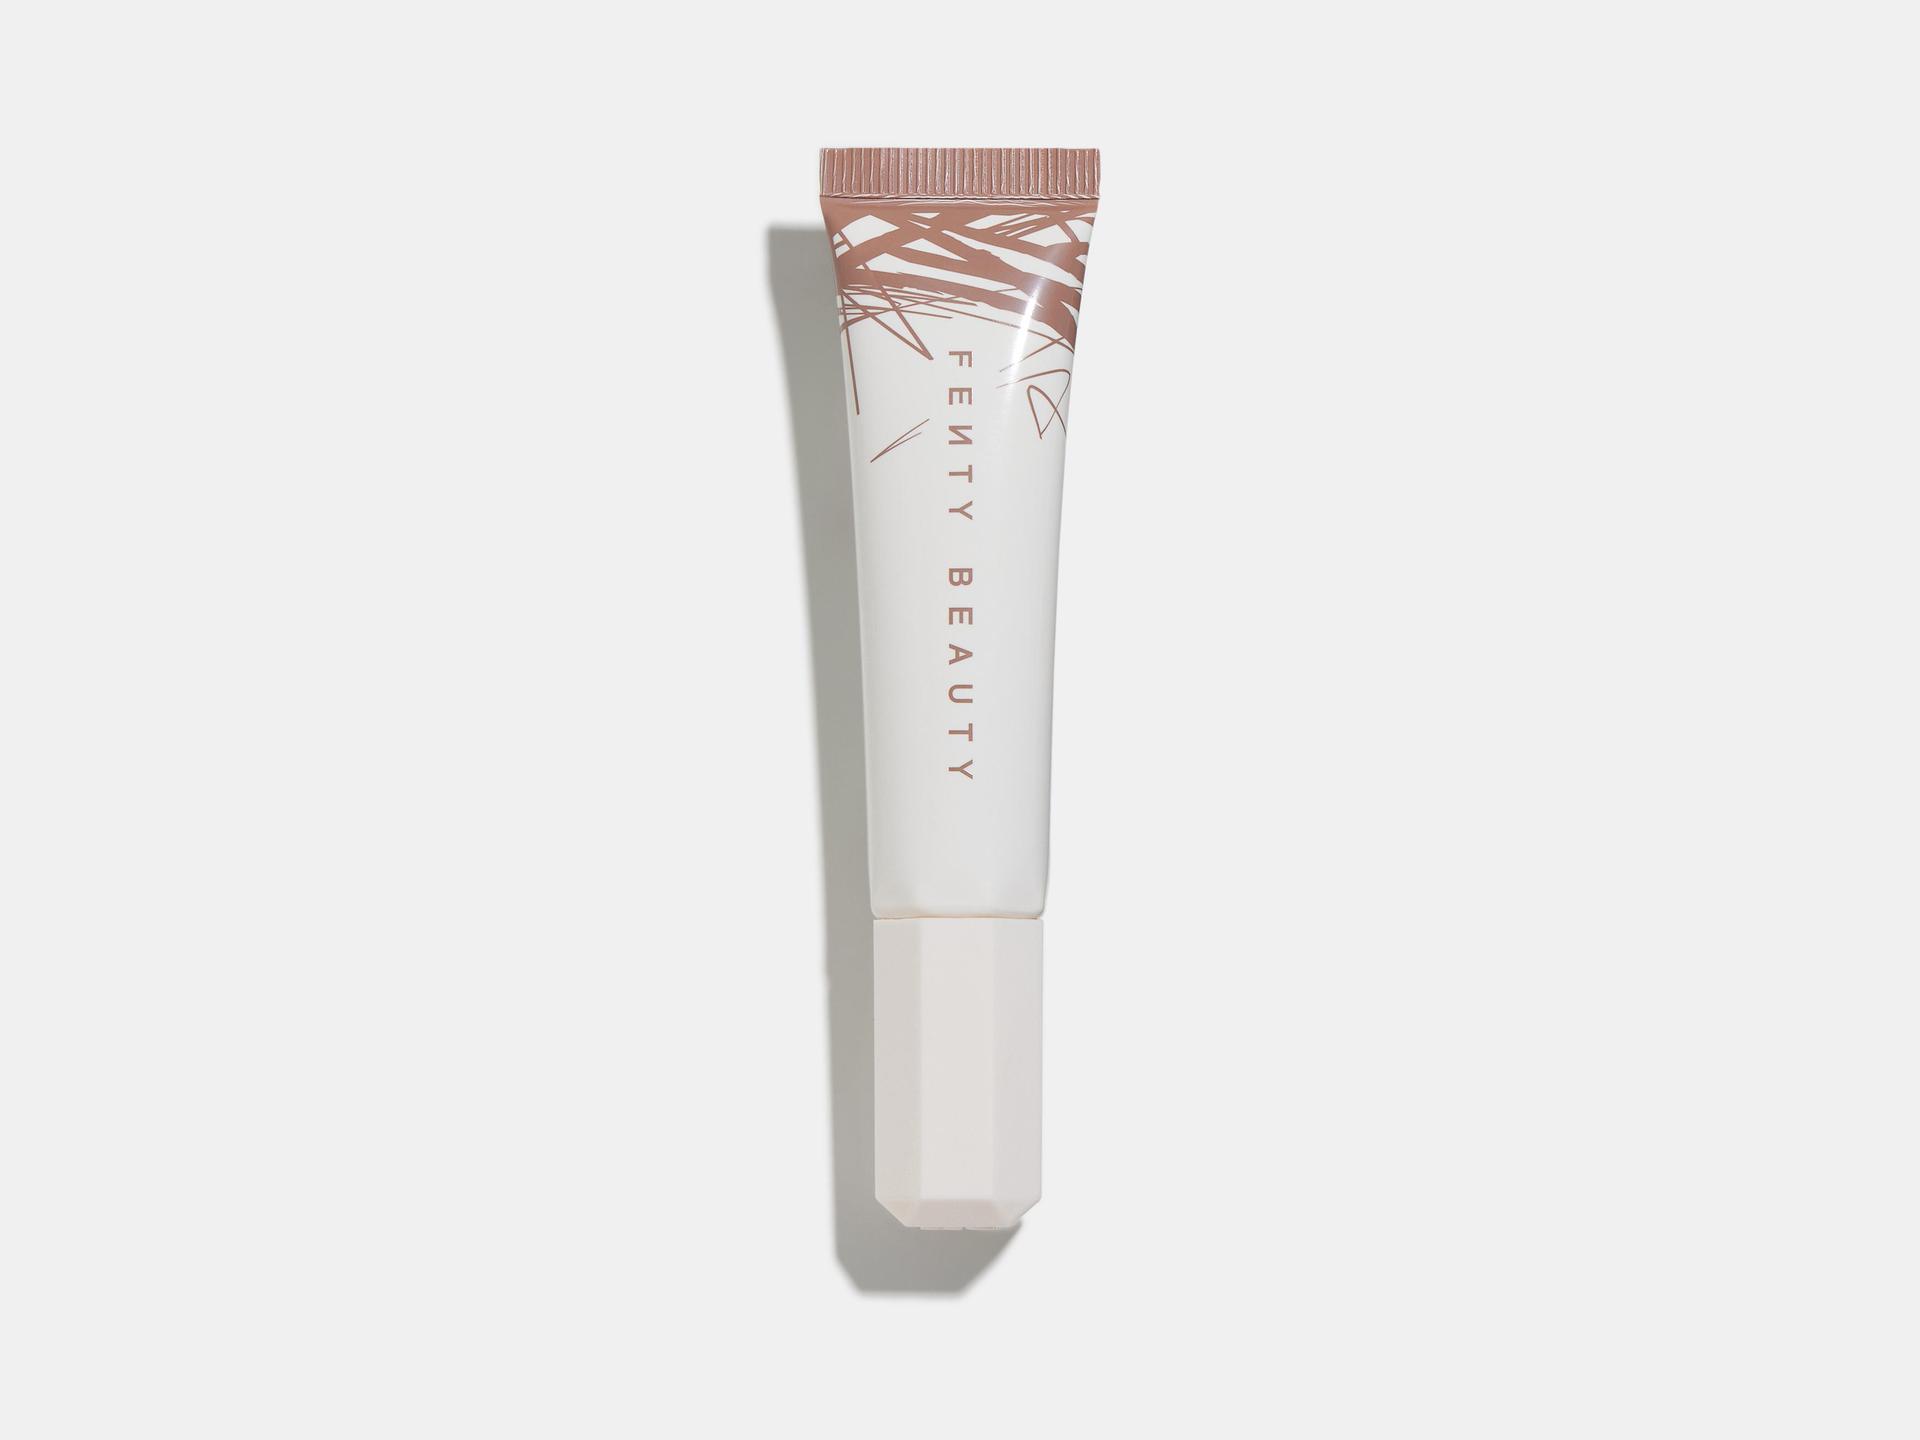 07245d8951f255a97da8fe93afb03eb5e82d93f6_Fenty_Beauty_Lip_Balm_in_Coco_Drizzle_Number4